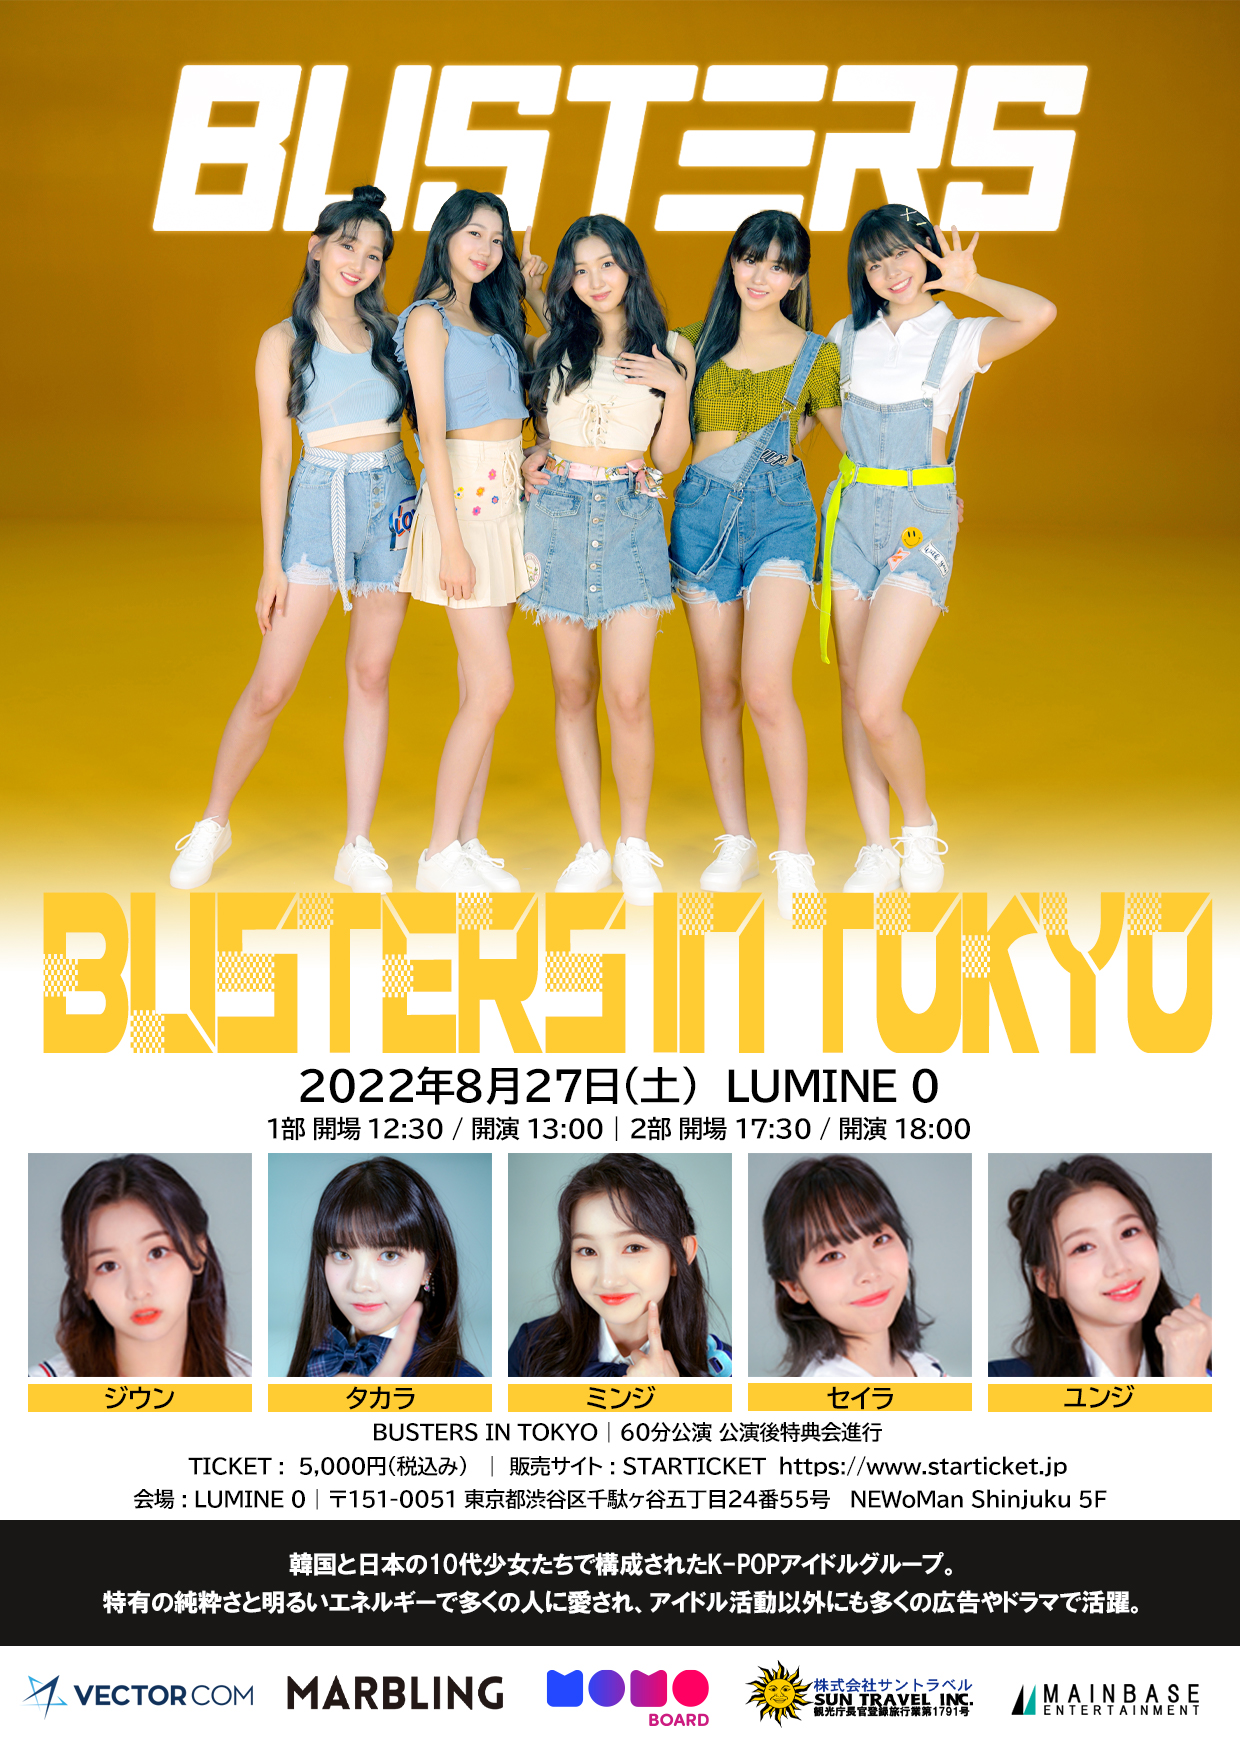 BUSTERS 日本単独公演  BUSTERS IN TOKYO  開催決定   株式会社MAIN BASE